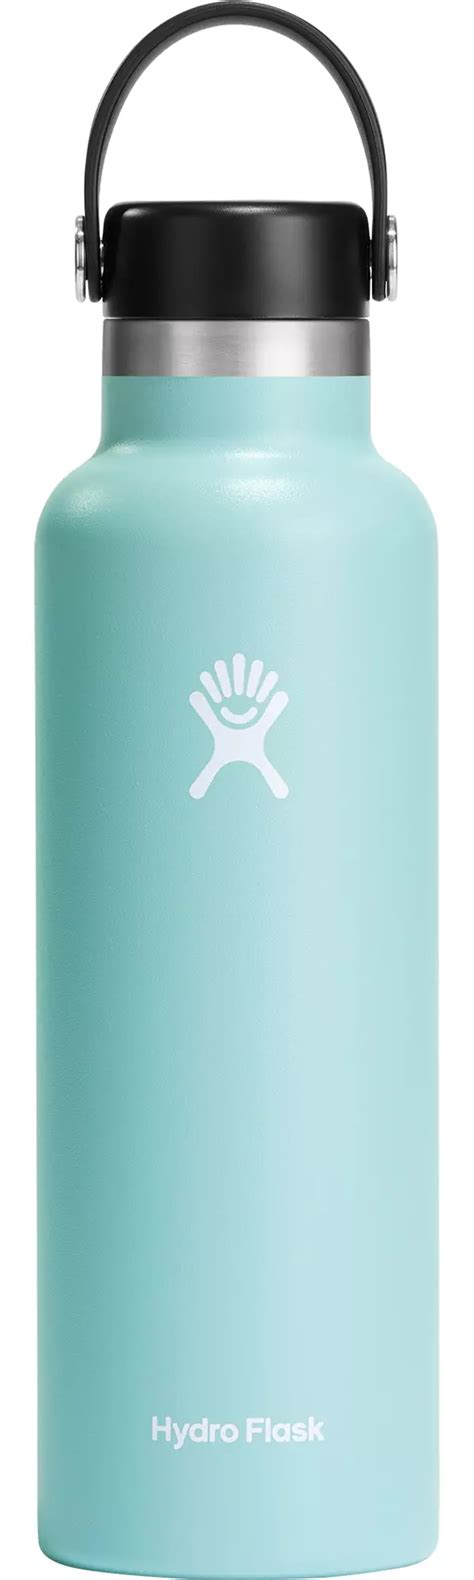 Hydro Flask Standard Mouth 21 Oz Bottle With Flex Cap Best Price Guarantee At Dicks